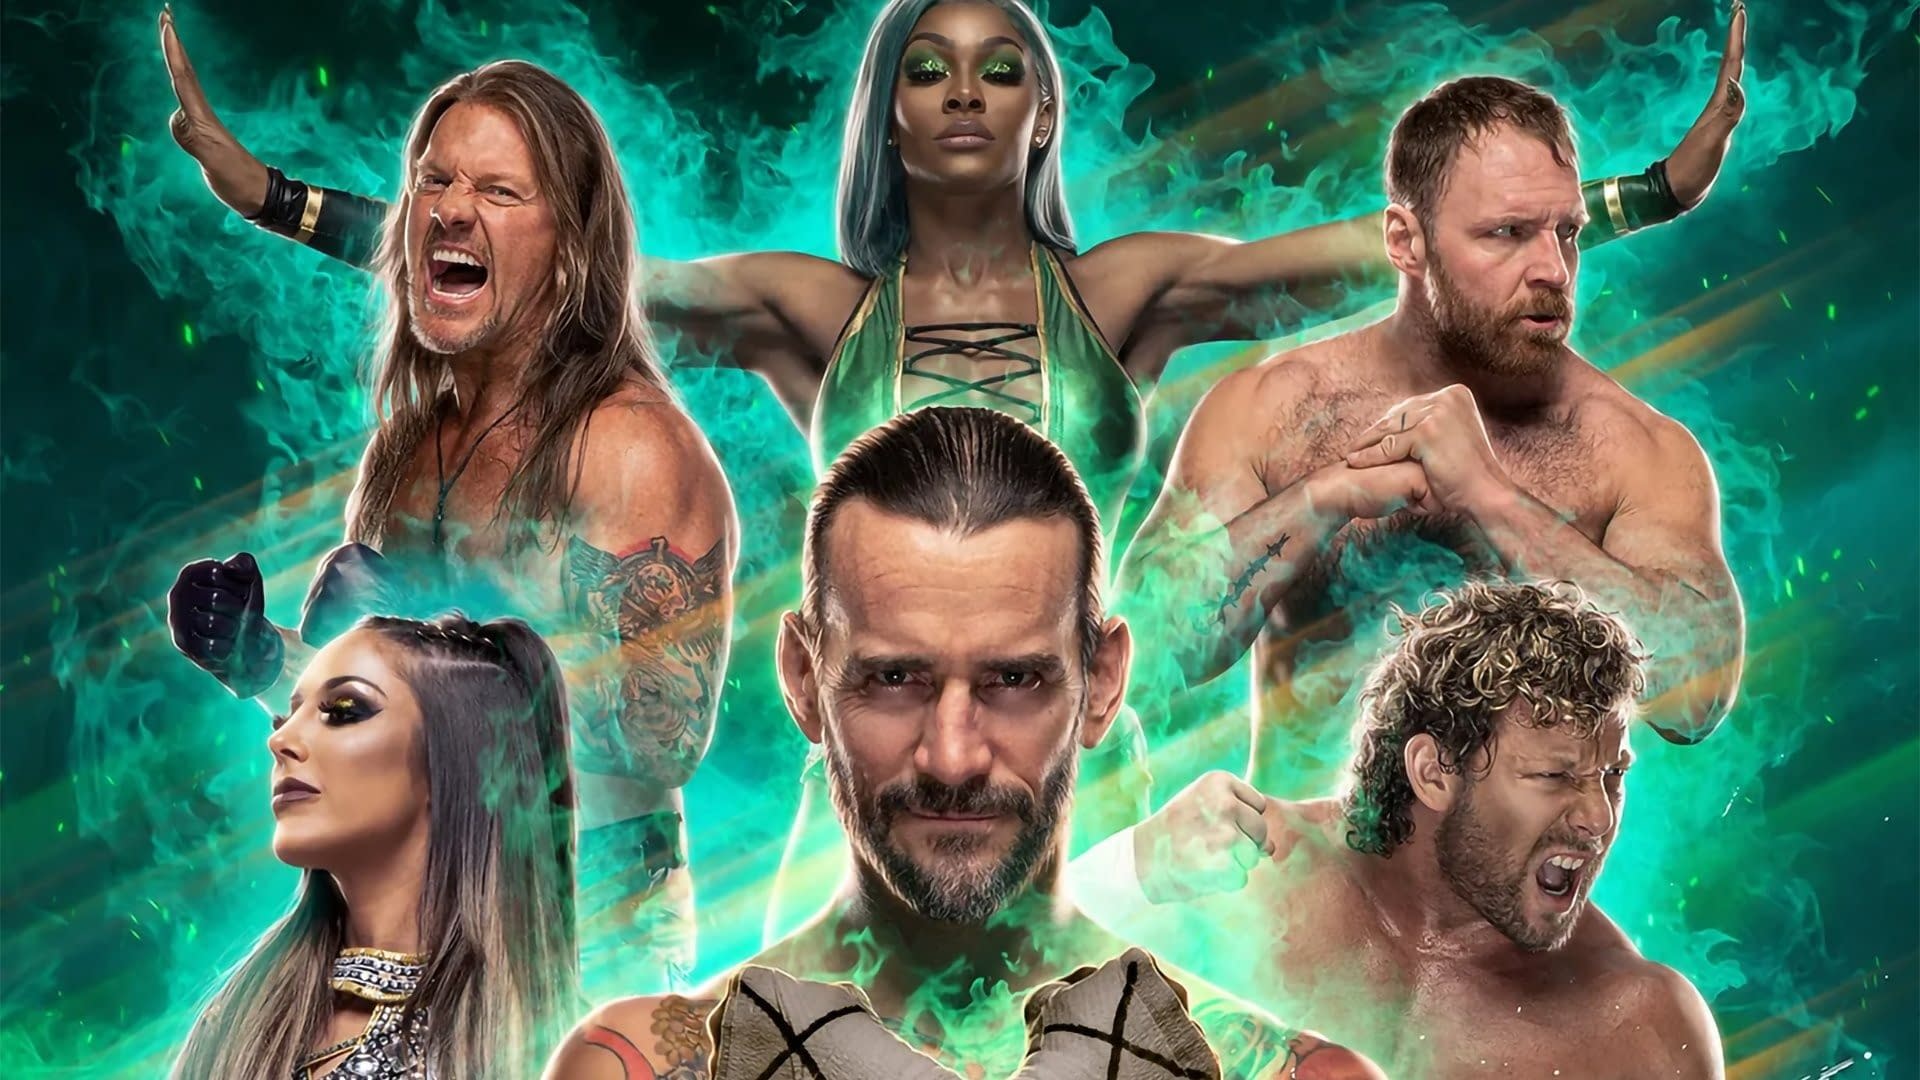 AEW: Fight Forever is preparing to offer a realistic wrestling experience